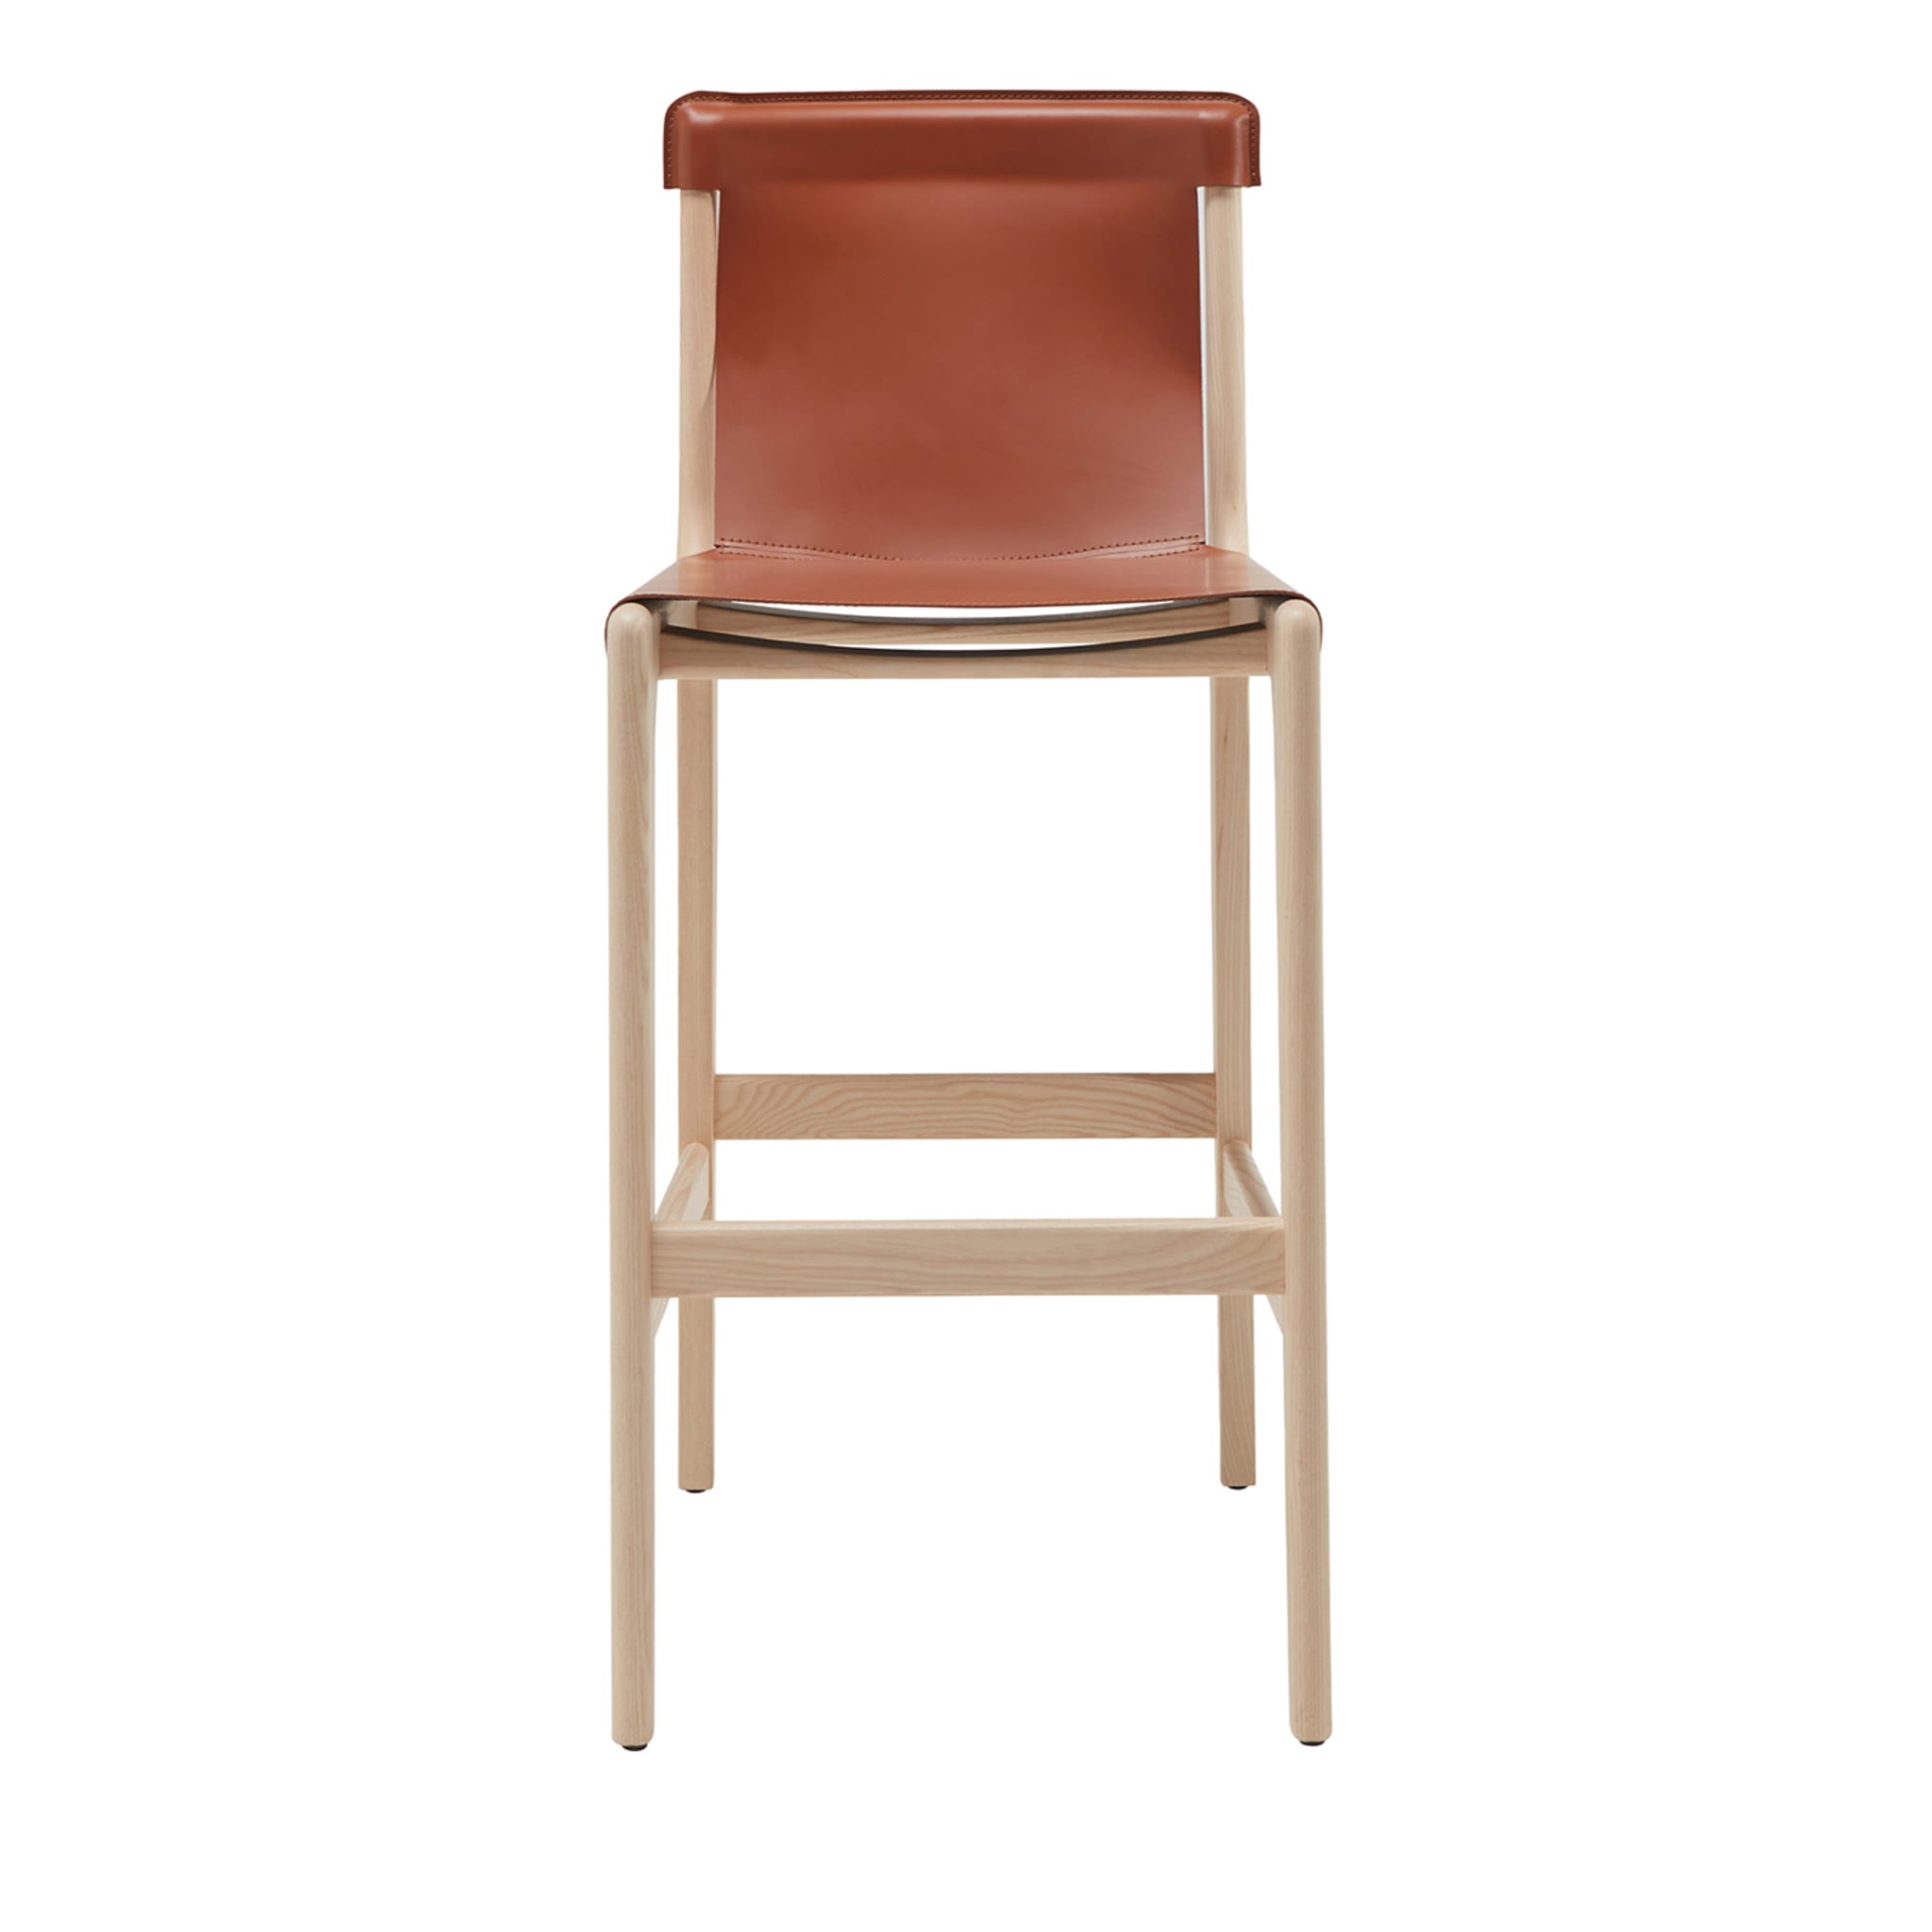 Burano/sg 30 Brown Leather Counter Stool by Balutto Associati - Main view